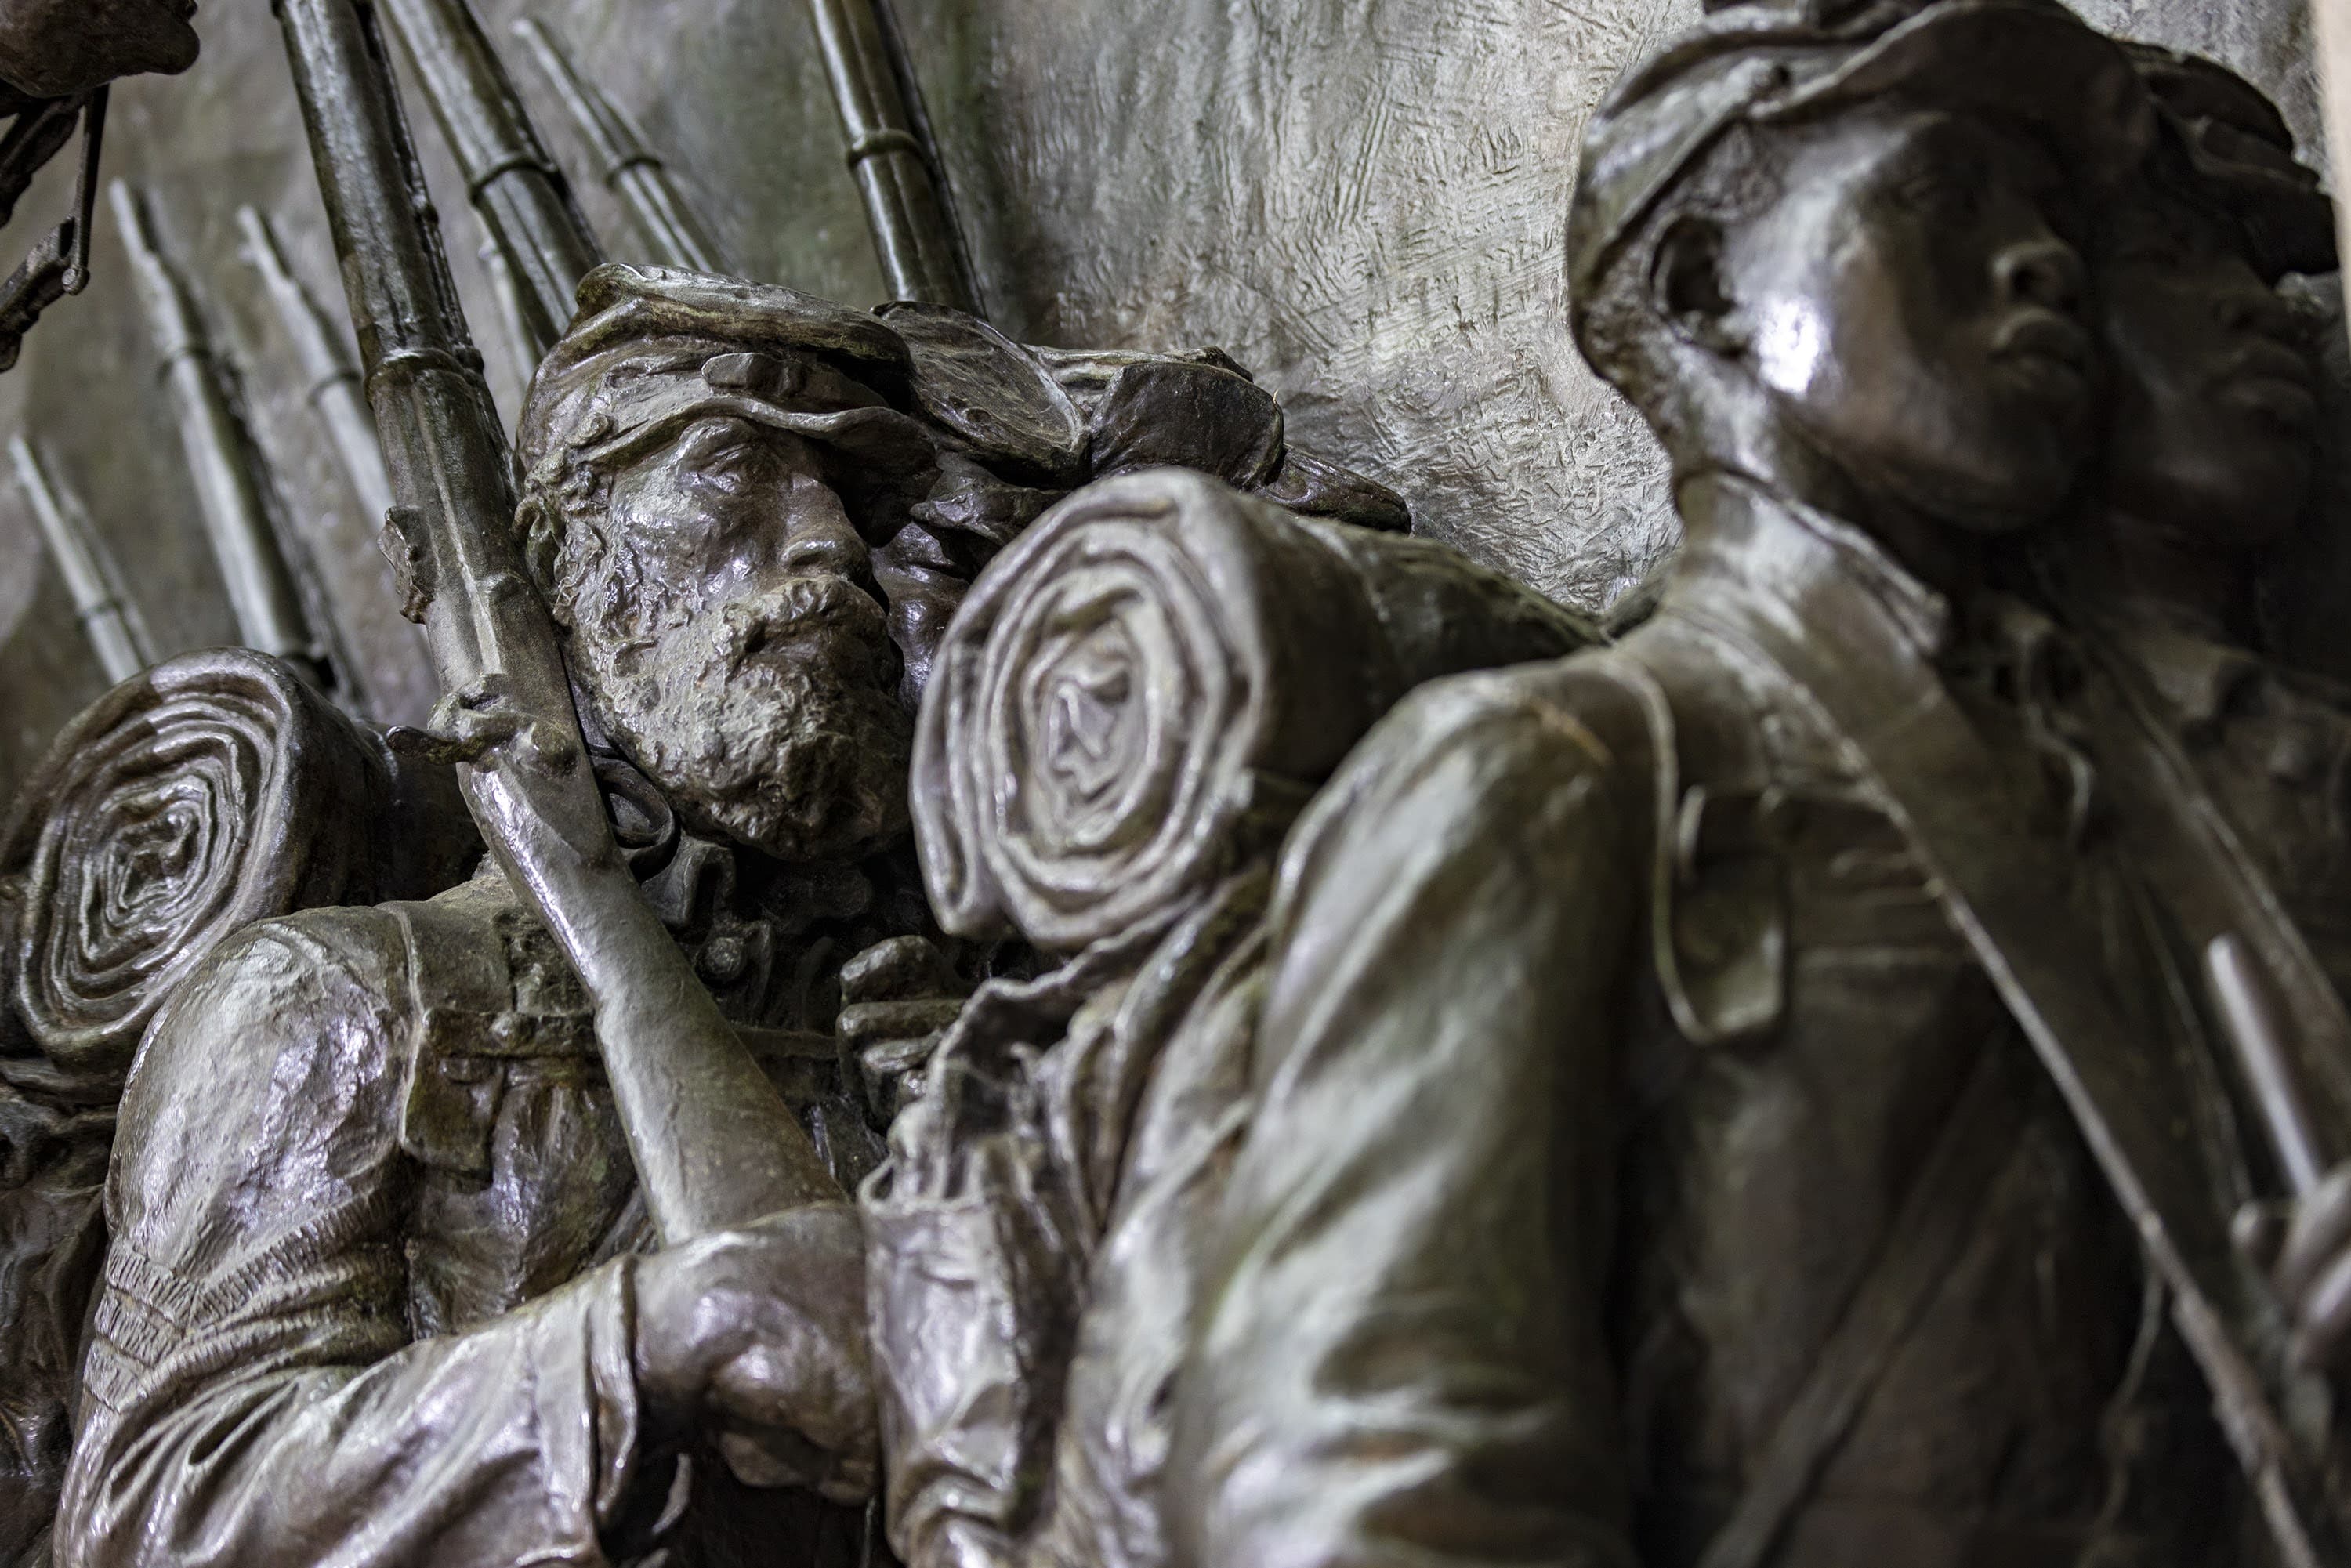 The fully restored Robert Gould Shaw and the 54th Regiment Memorial. (Jesse Costa/WBUR)